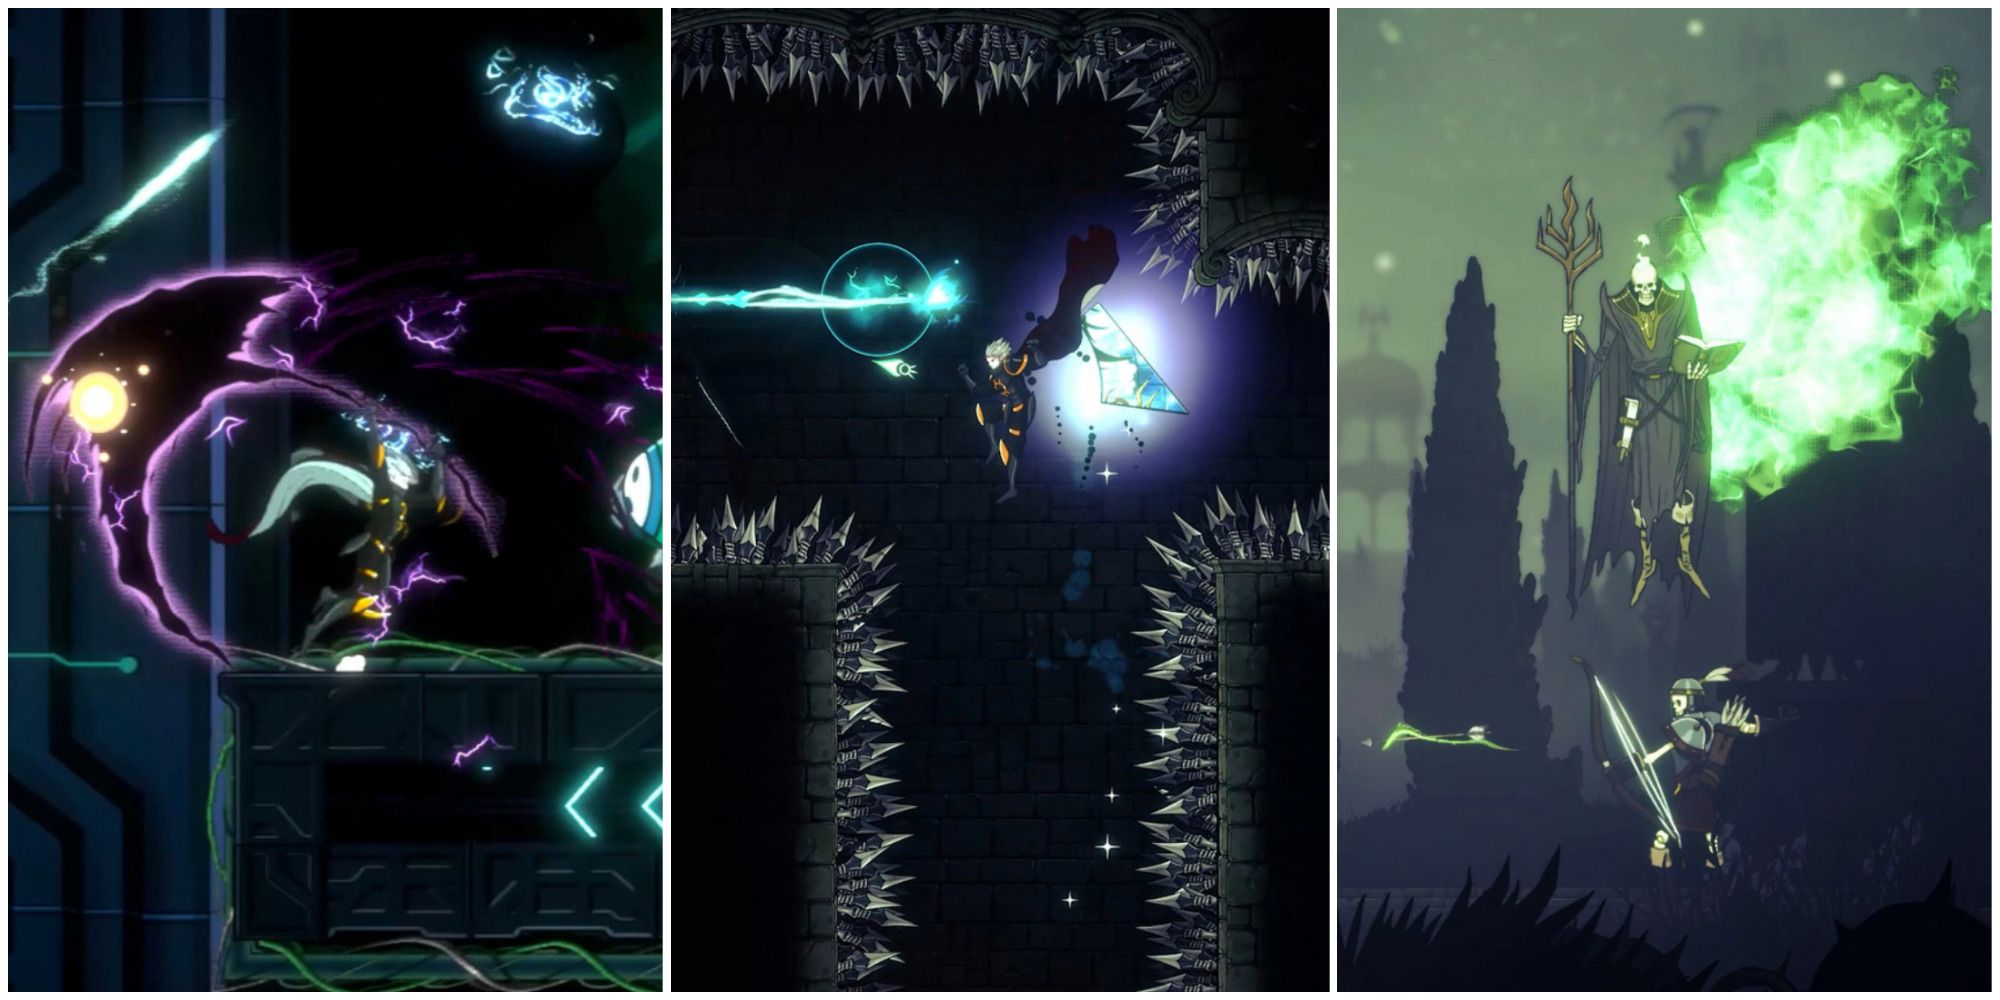 king of darkness shadow attack, spike area magic attack, skeletong wizard and archer aeterna noctis featured